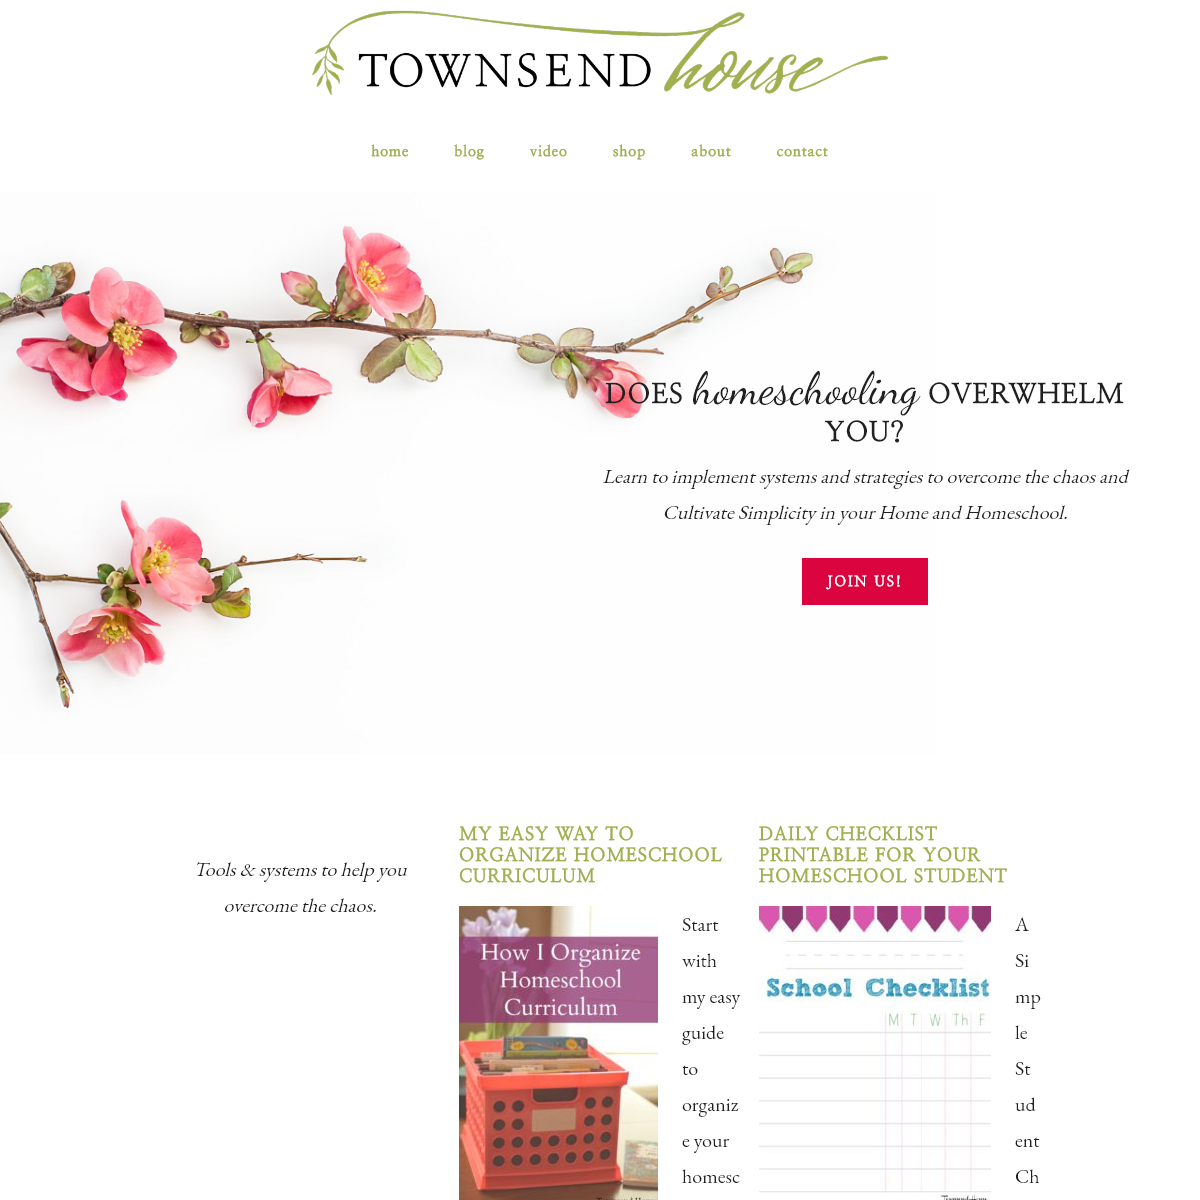 Townsend House - Cultivate Simplicity in your Home and Homeschool